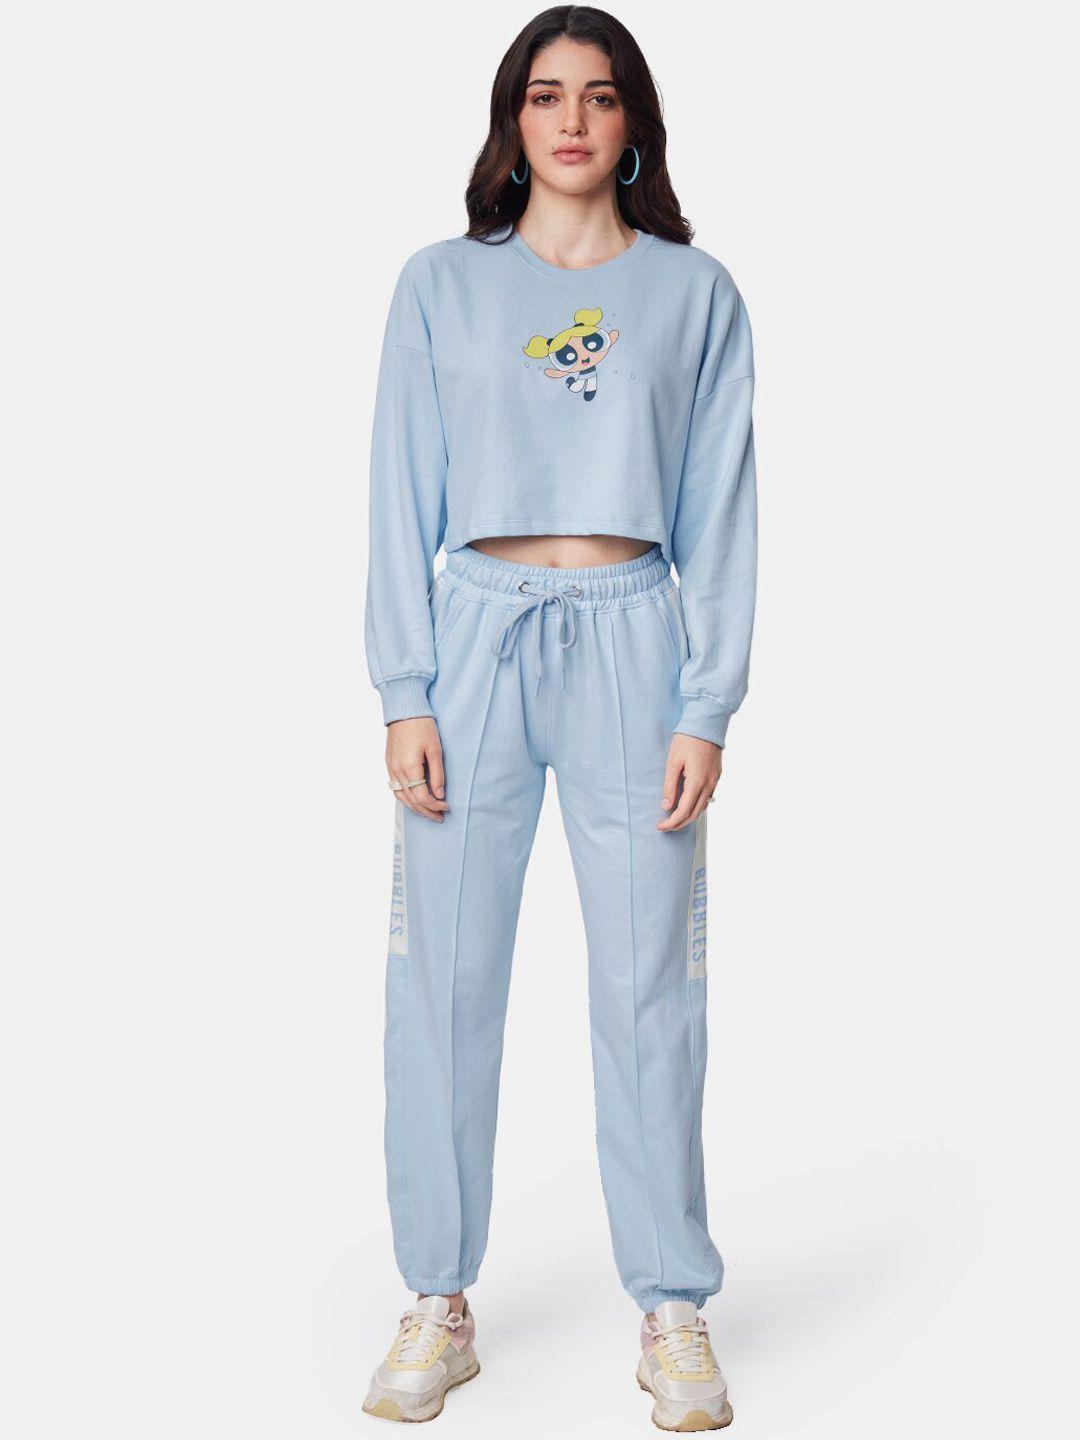 the souled store women powerpuff girls printed pure cotton sweatshirt with joggers